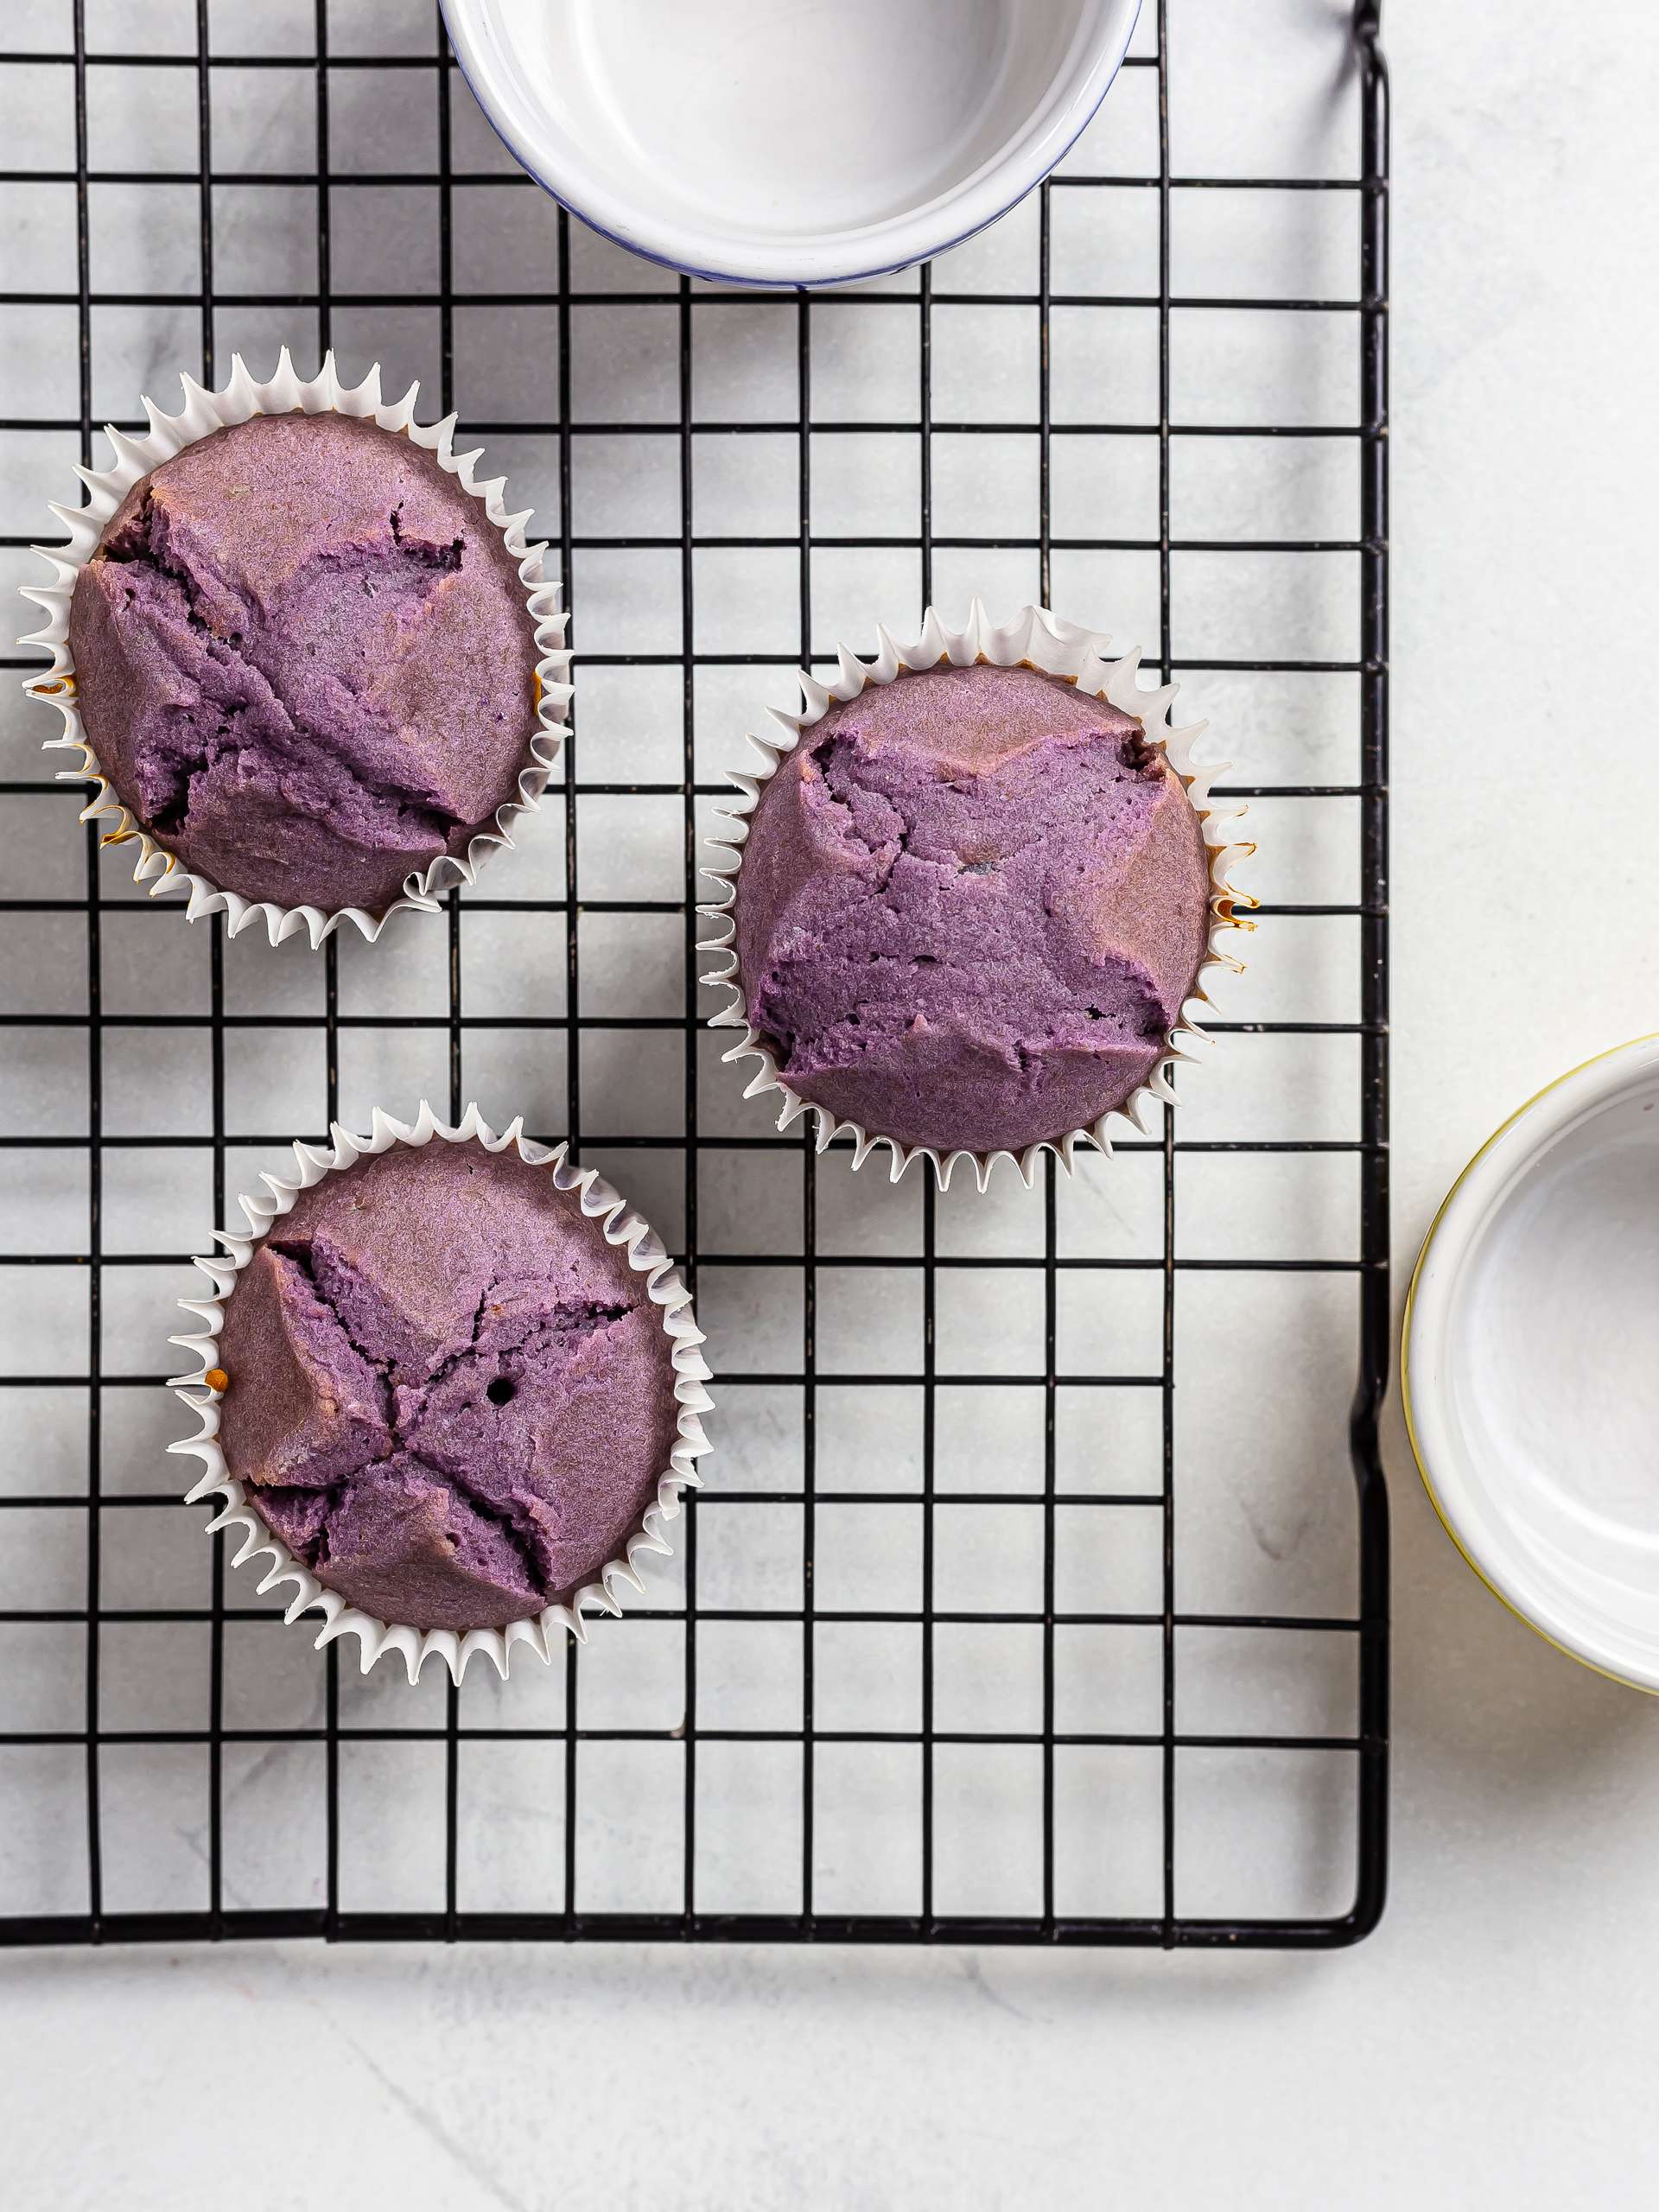 baked ube cupcakes on a rack